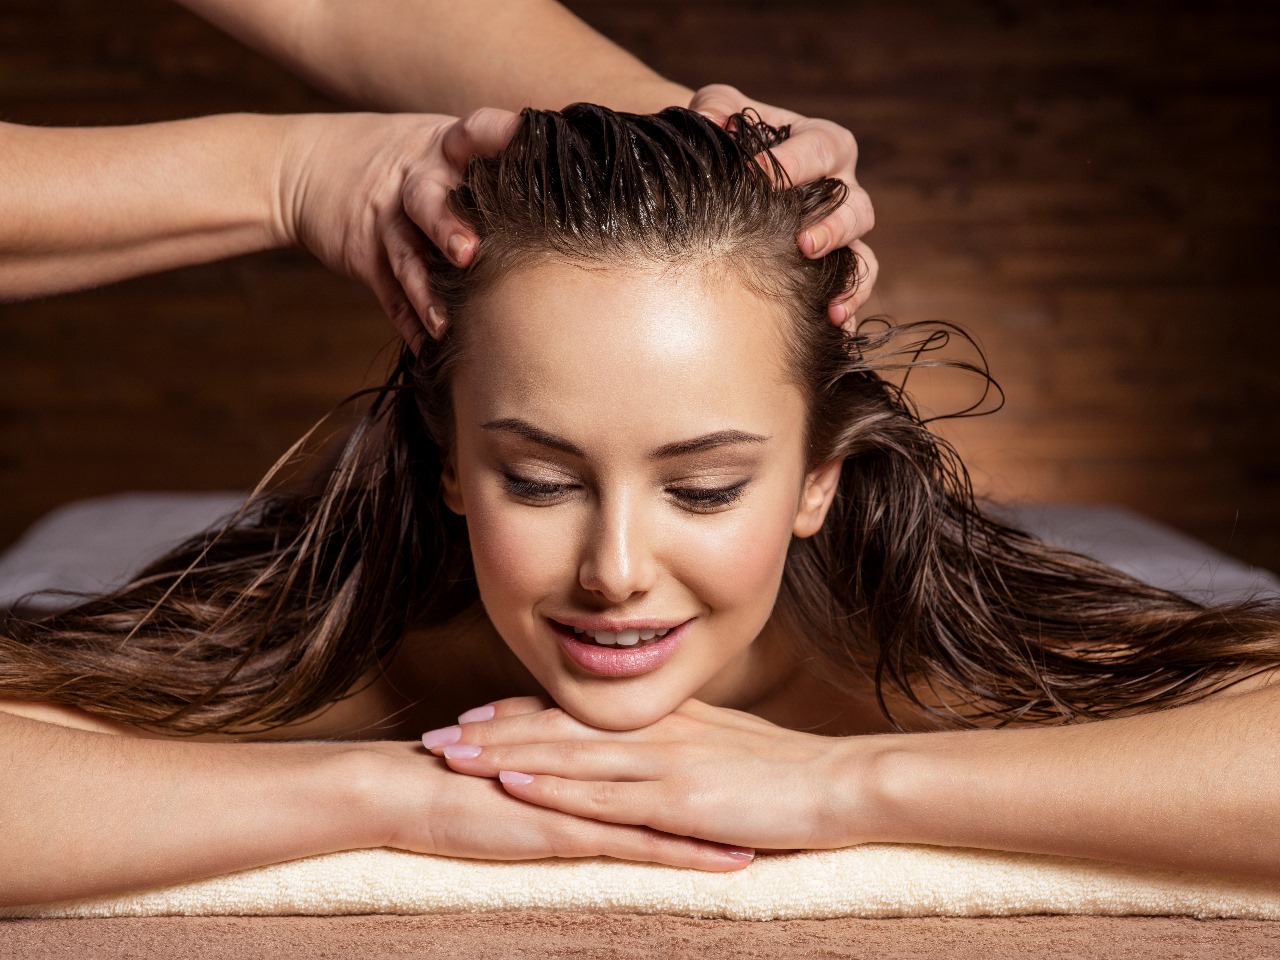 What is the best way to massage myself for a migraine?